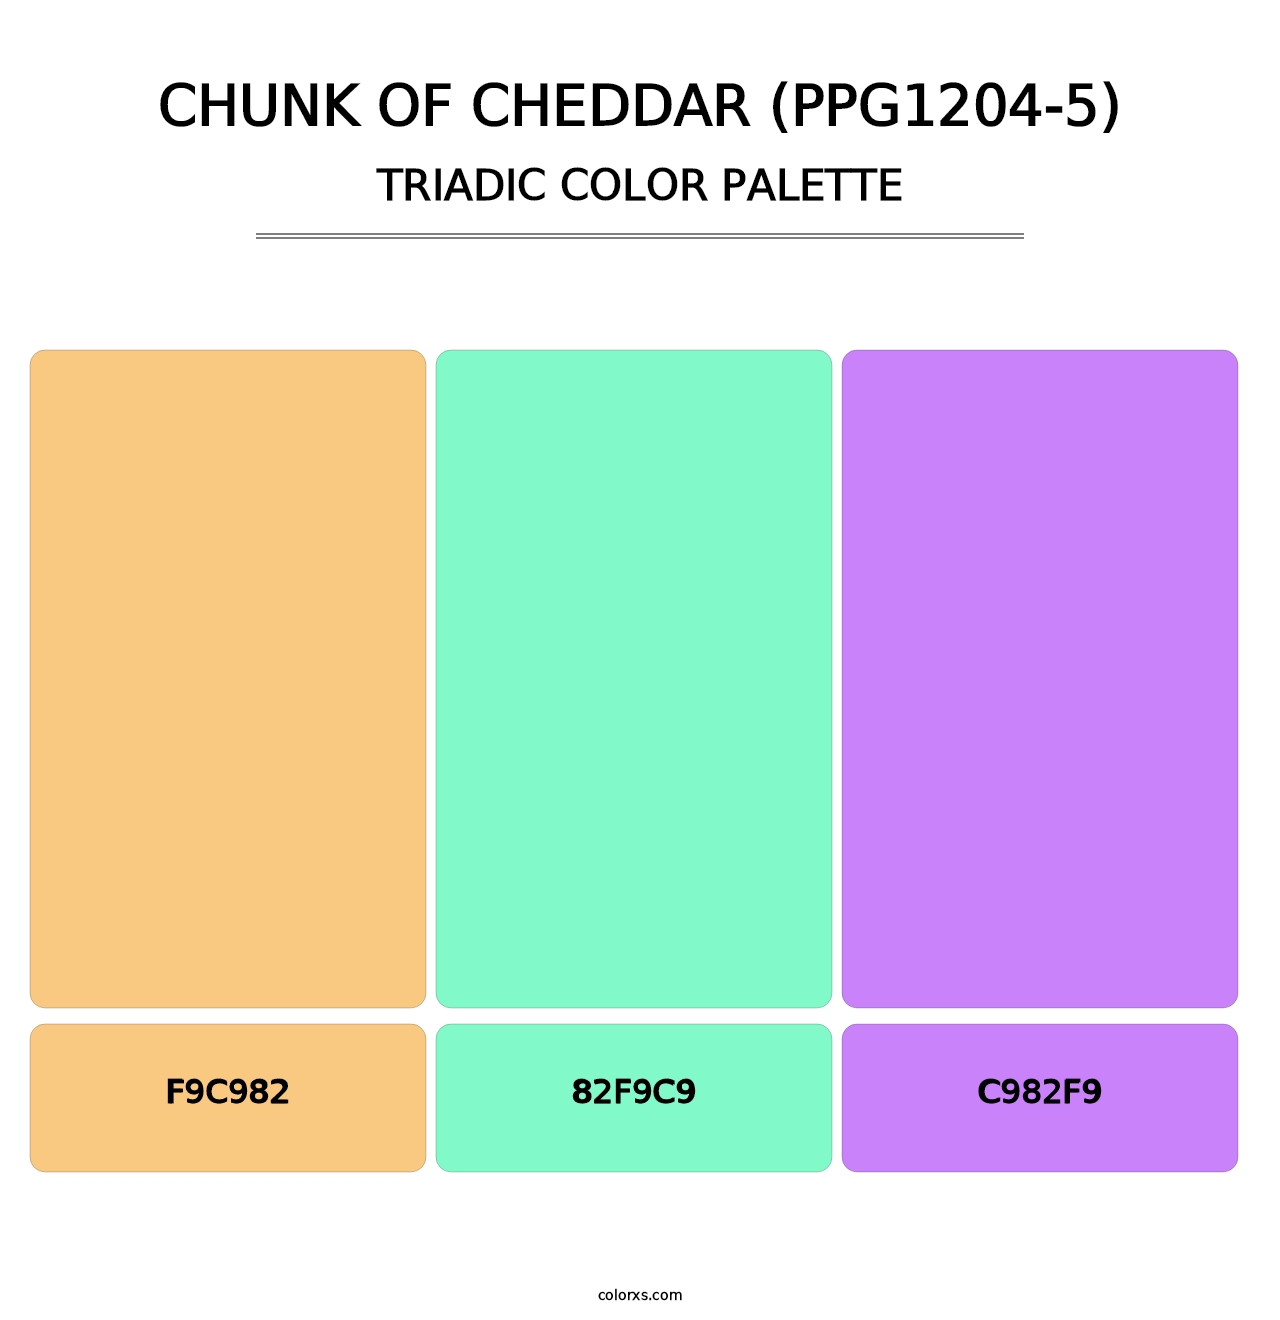 Chunk Of Cheddar (PPG1204-5) - Triadic Color Palette